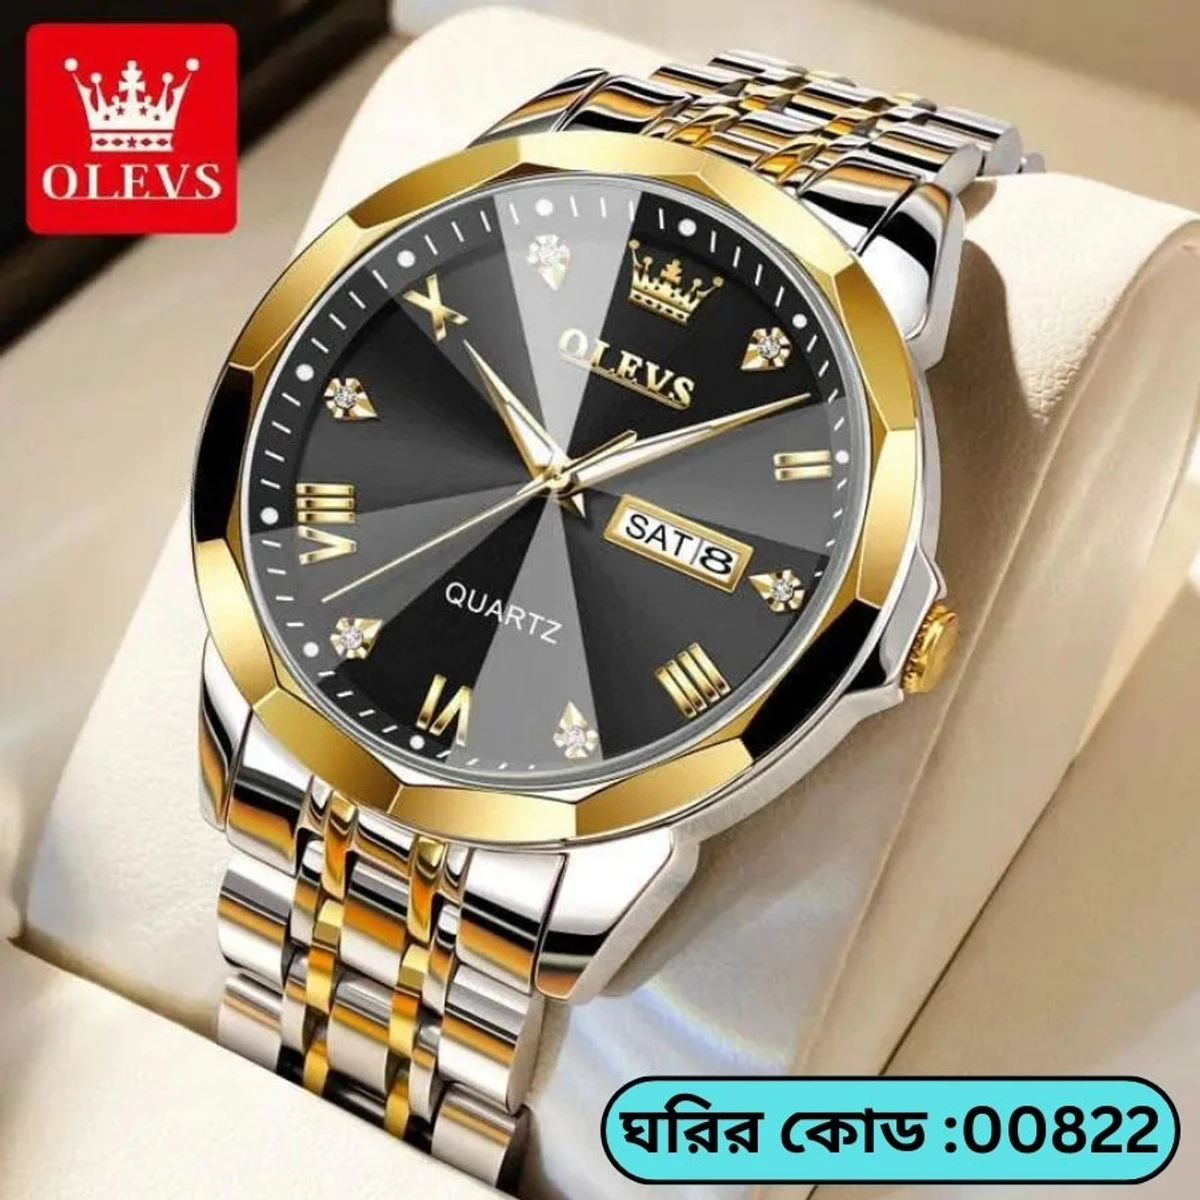 OLEVS MODEL 9931 Watch for Men Stainless Steel Watches - 9941 TOTON AR DIAL BLACK ROUND GOLDEN - - MAN WATCH - LOCK PUSH